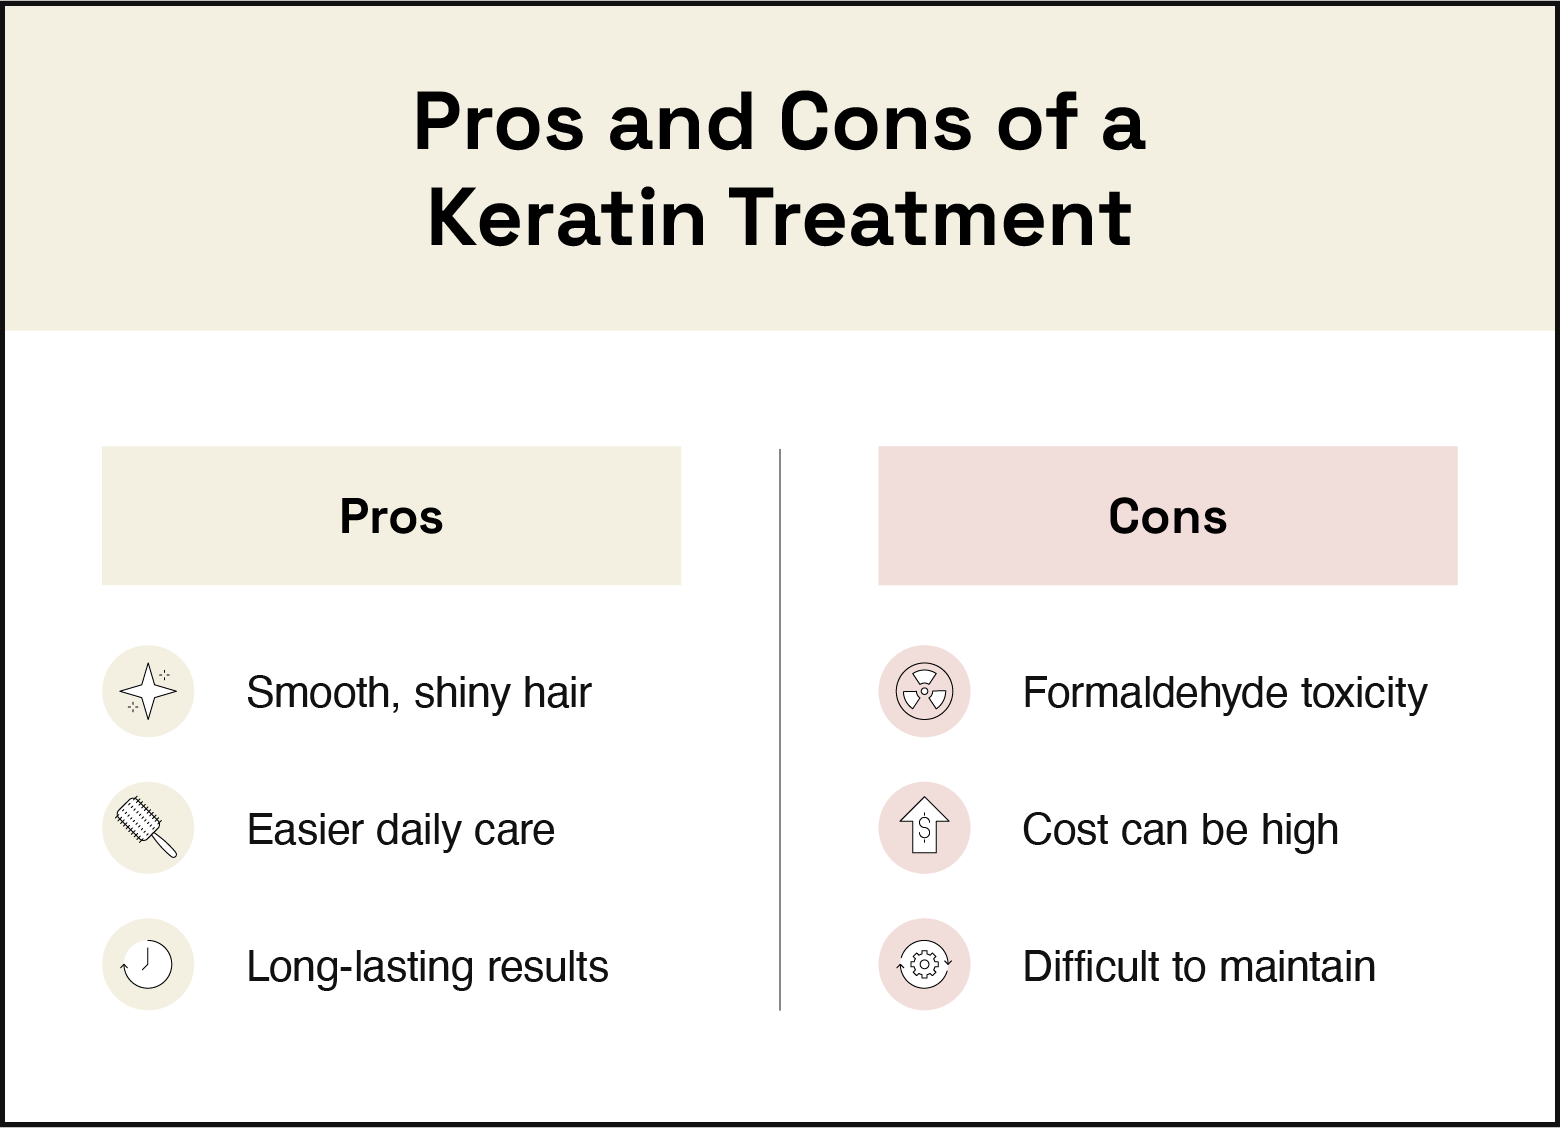 A two-column chart lists the pros and cons of a keratin treatment